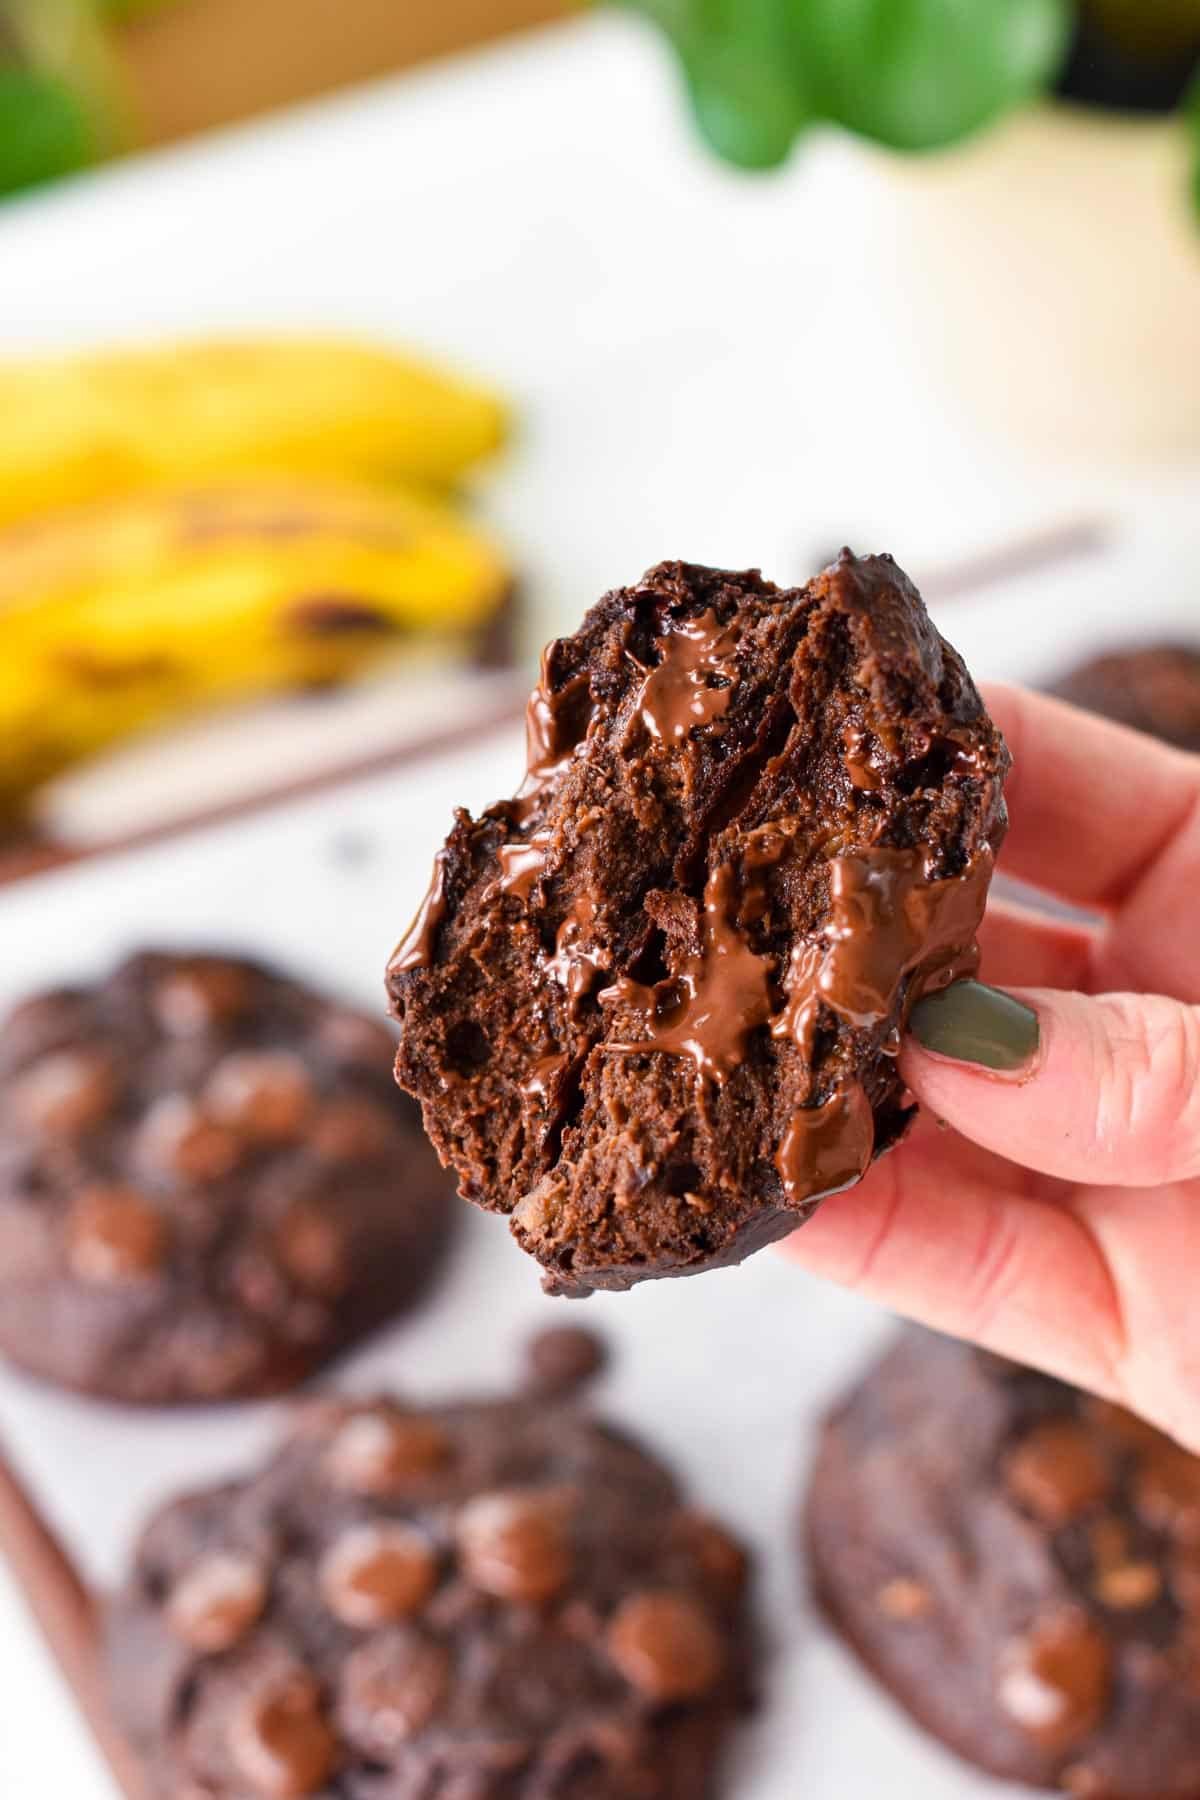 a hand holding two halves of a chocolate banana cookies showing the extra fudgy chocolate texture